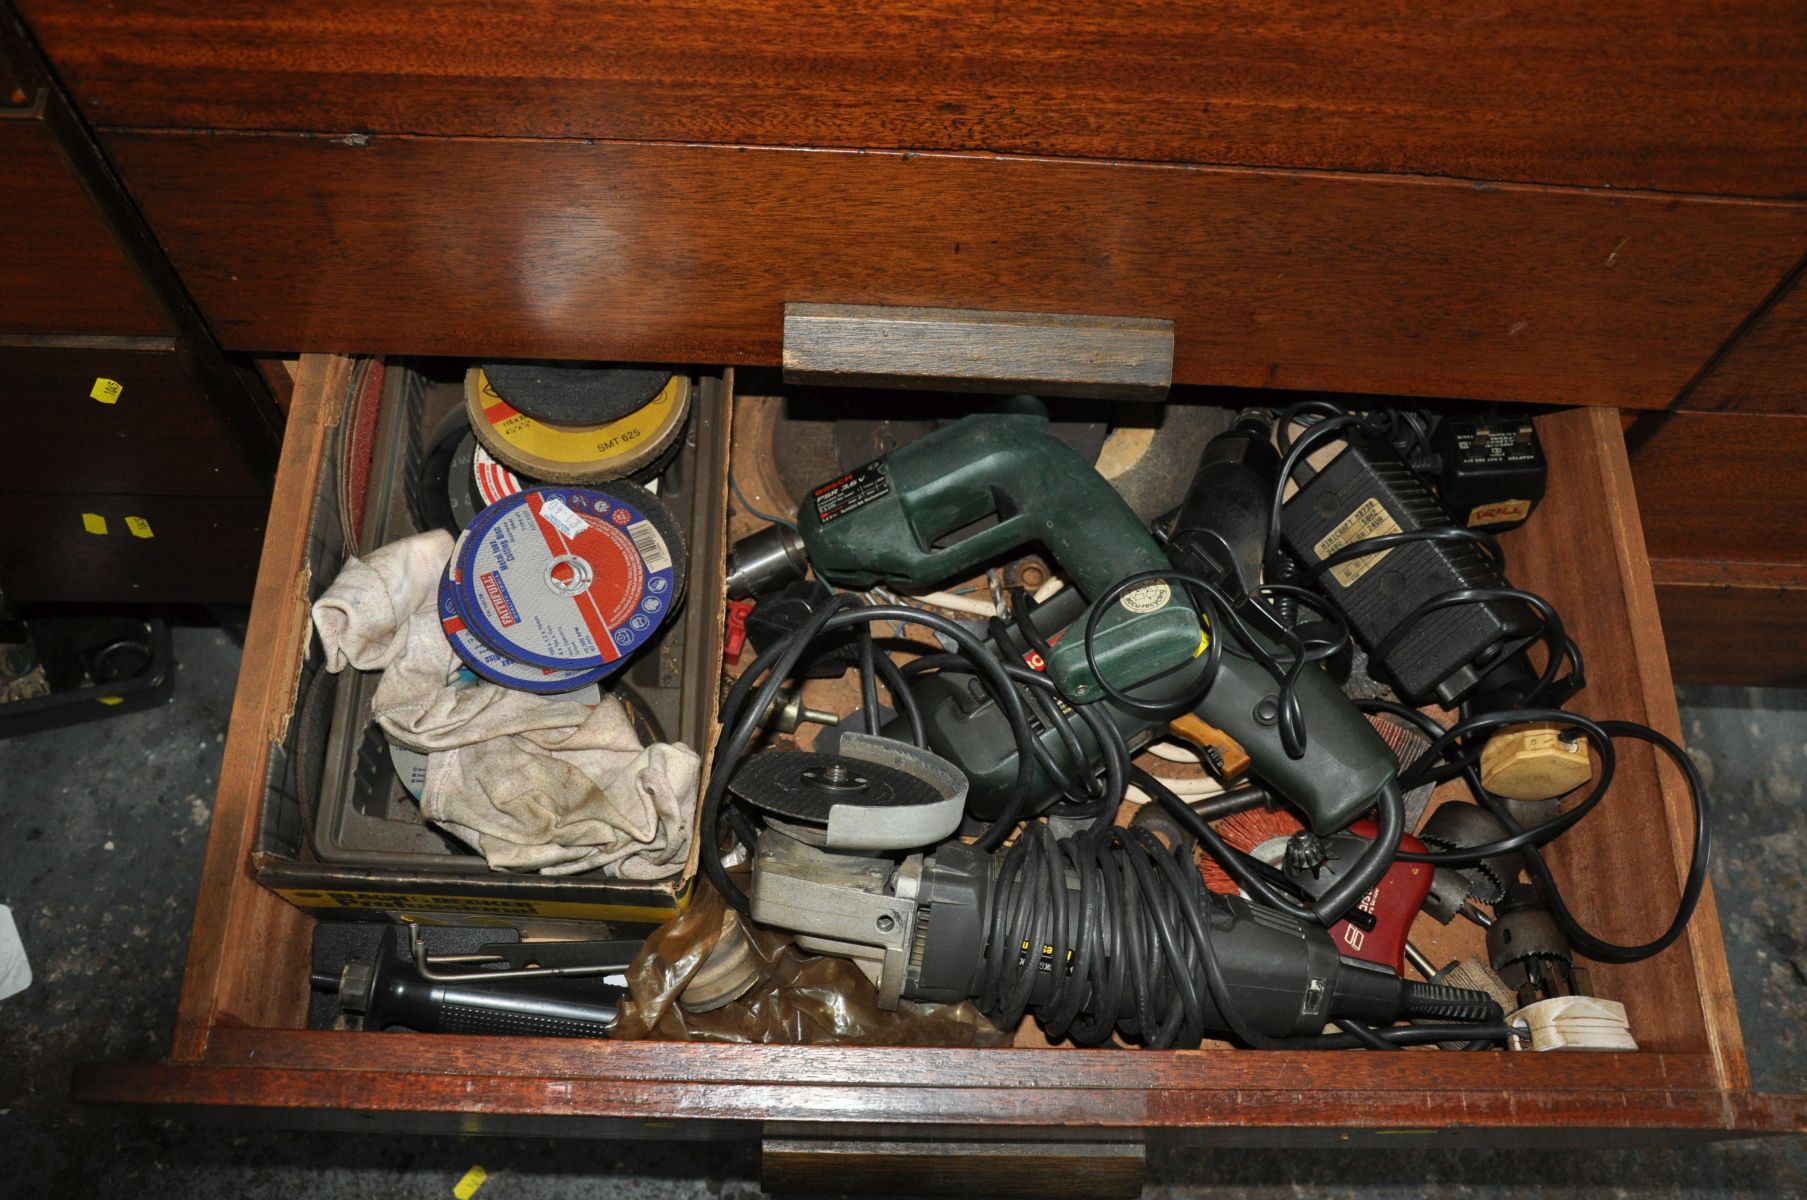 THE CONTENTS OF A DRAWER FULL OF POWER TOOLS, including a Bosch electric drill, a Black and Decker